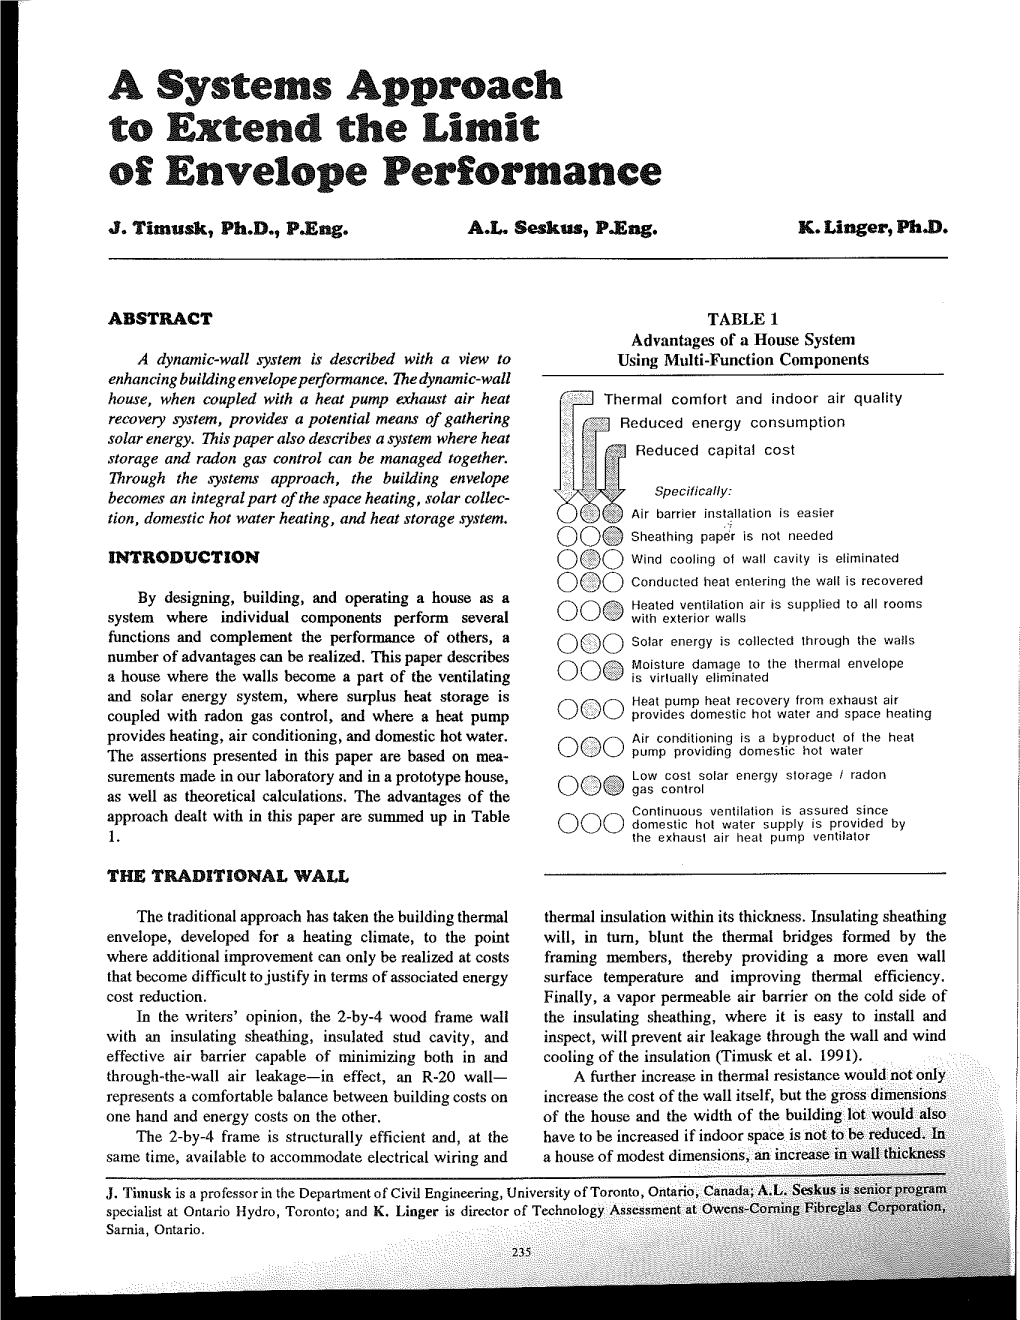 A Systems Approach to Extend the Limit of Envelope Performance